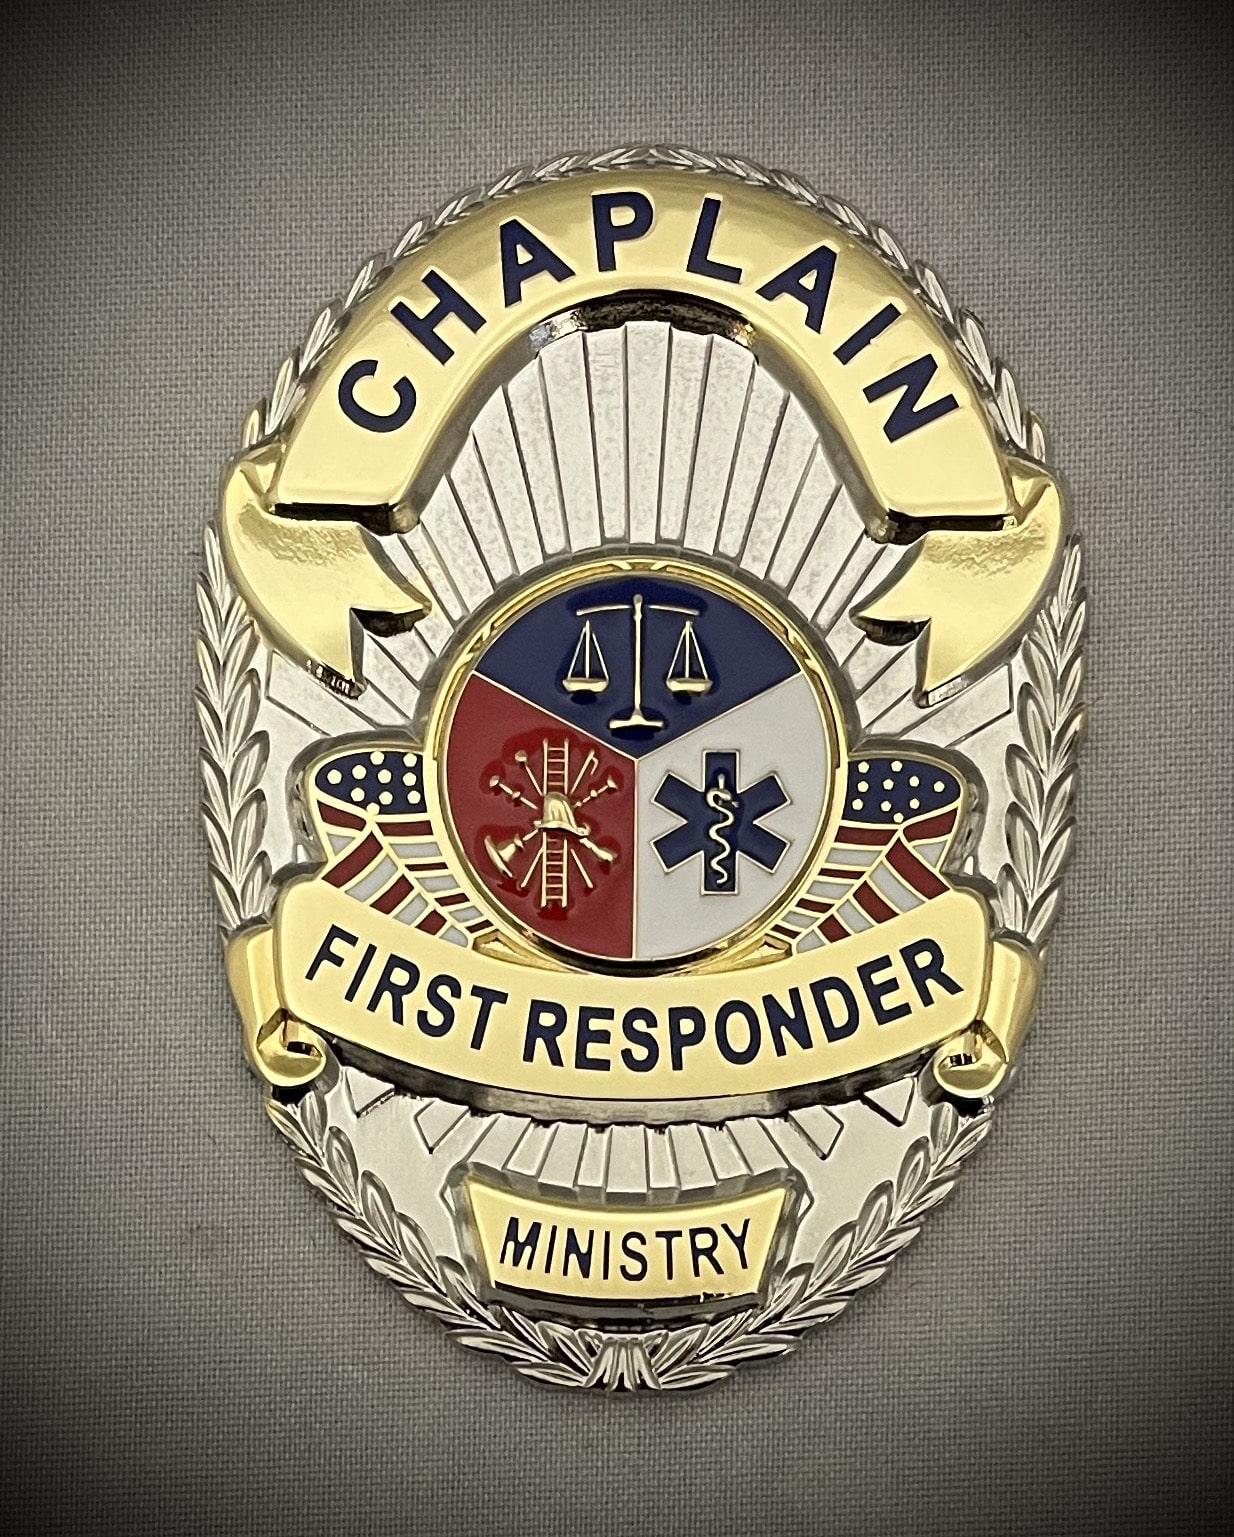 Chaplain First Responder Badge and leather ID holder